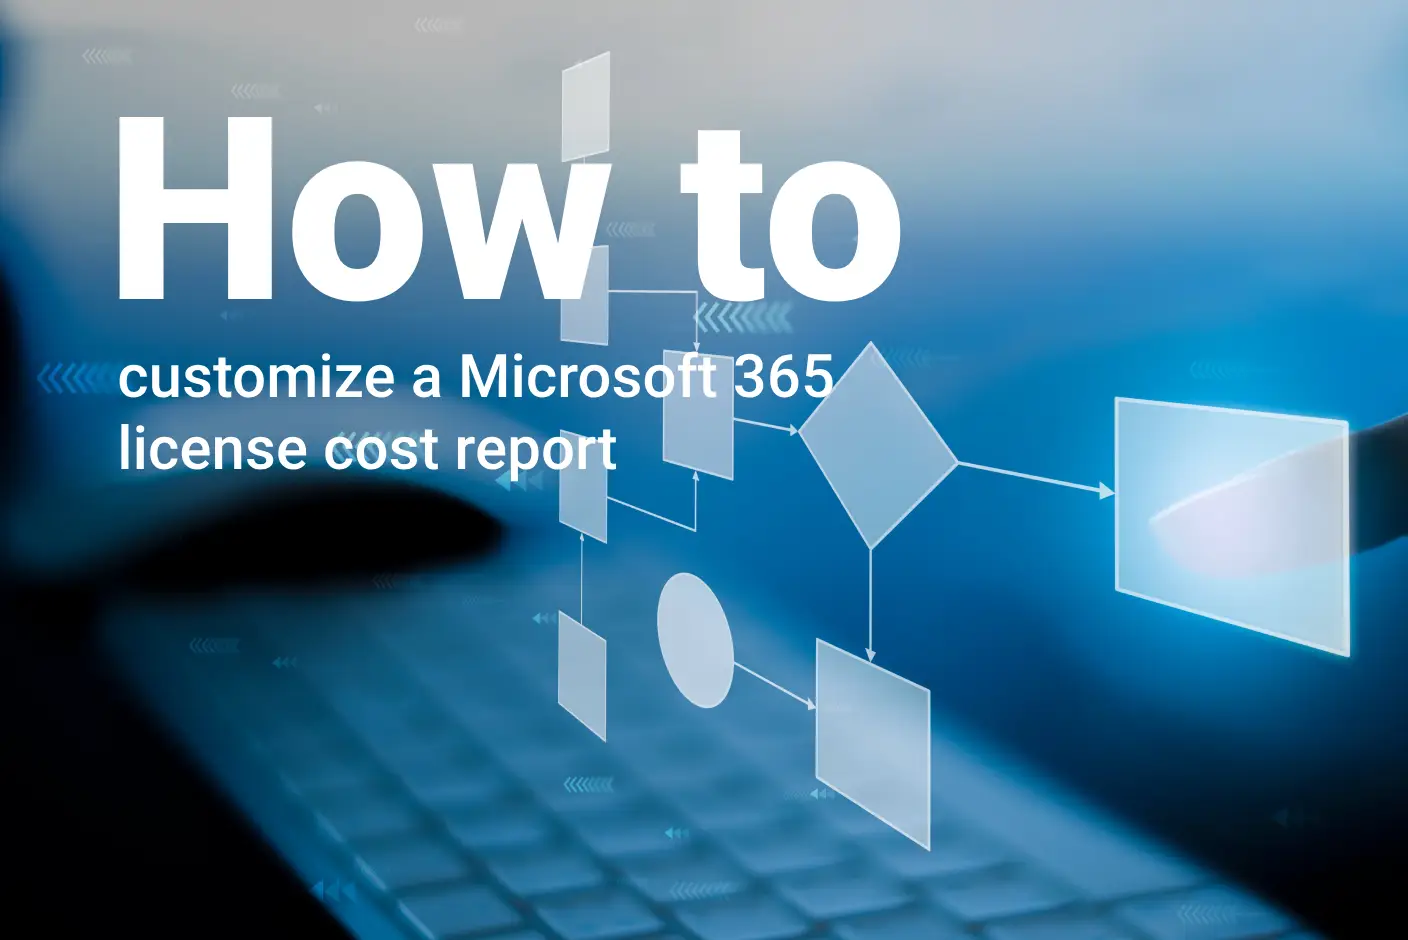 How to customize a Microsoft Office 365 license cost report